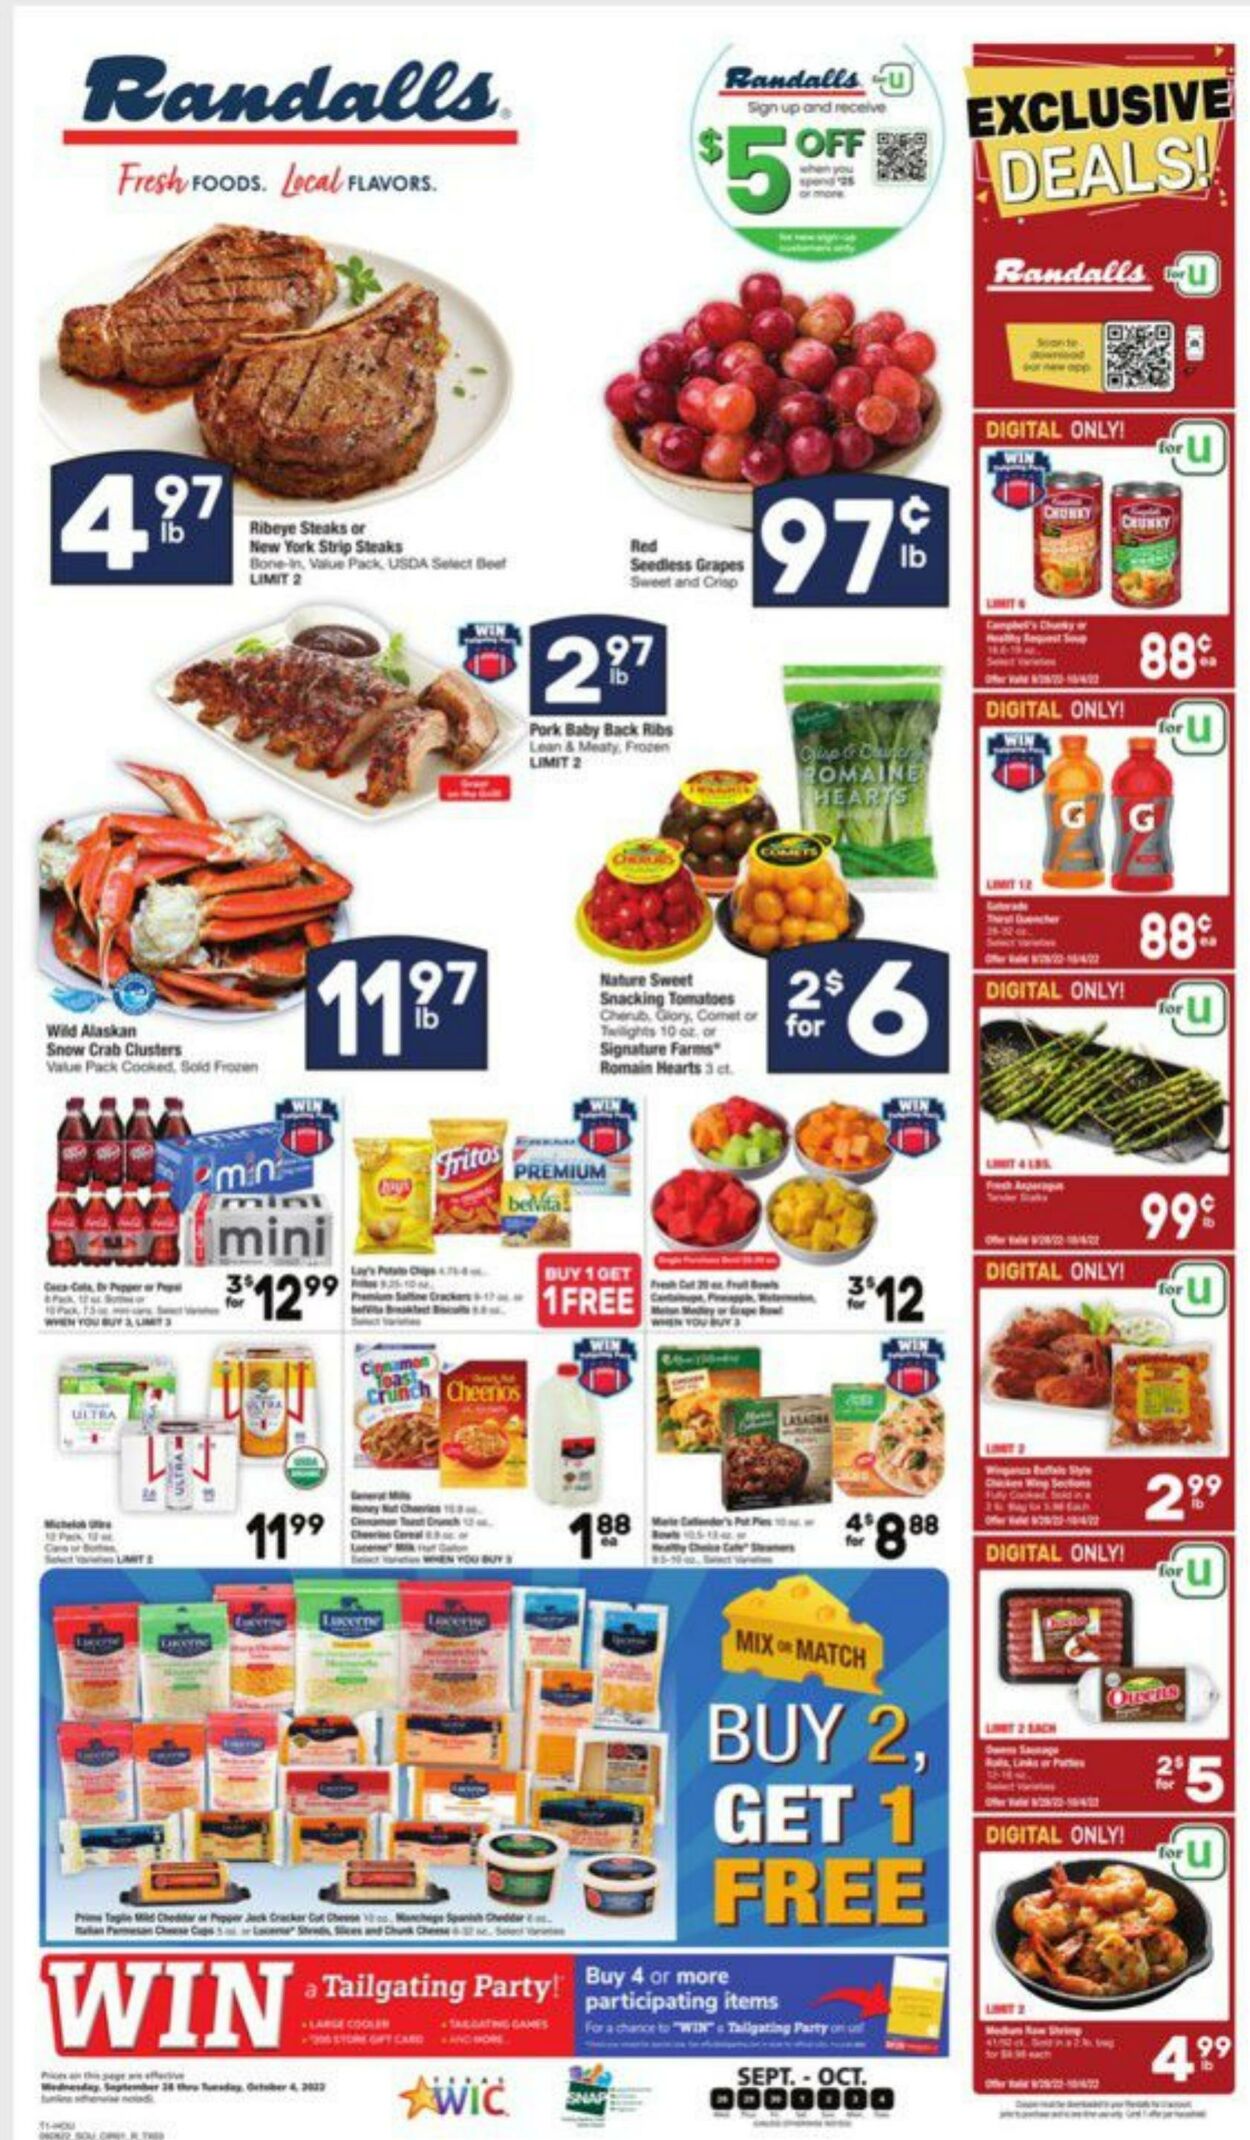 Randalls Promotional weekly ads